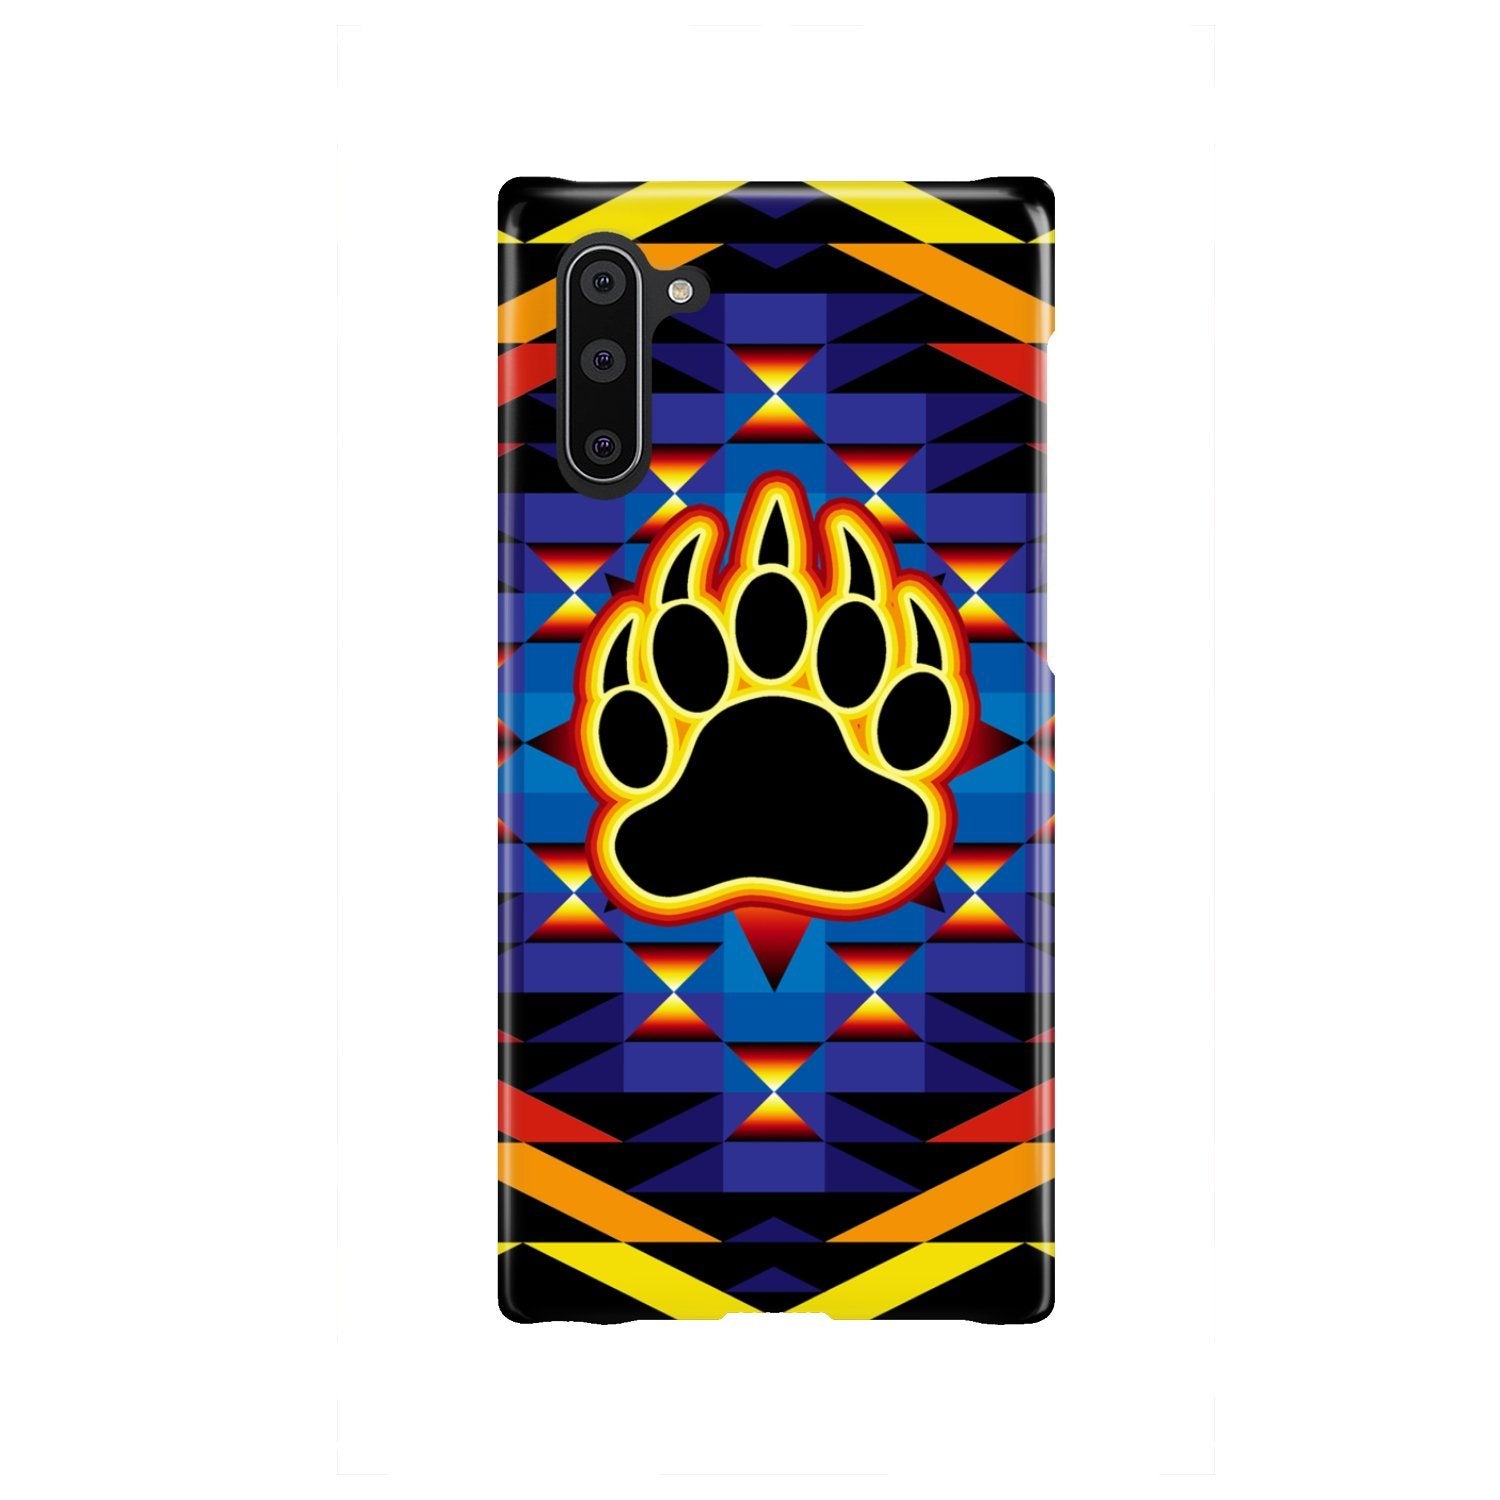 Sunset Bearpaw Phone Case Phone Case wc-fulfillment Samsung Galaxy Note 10 